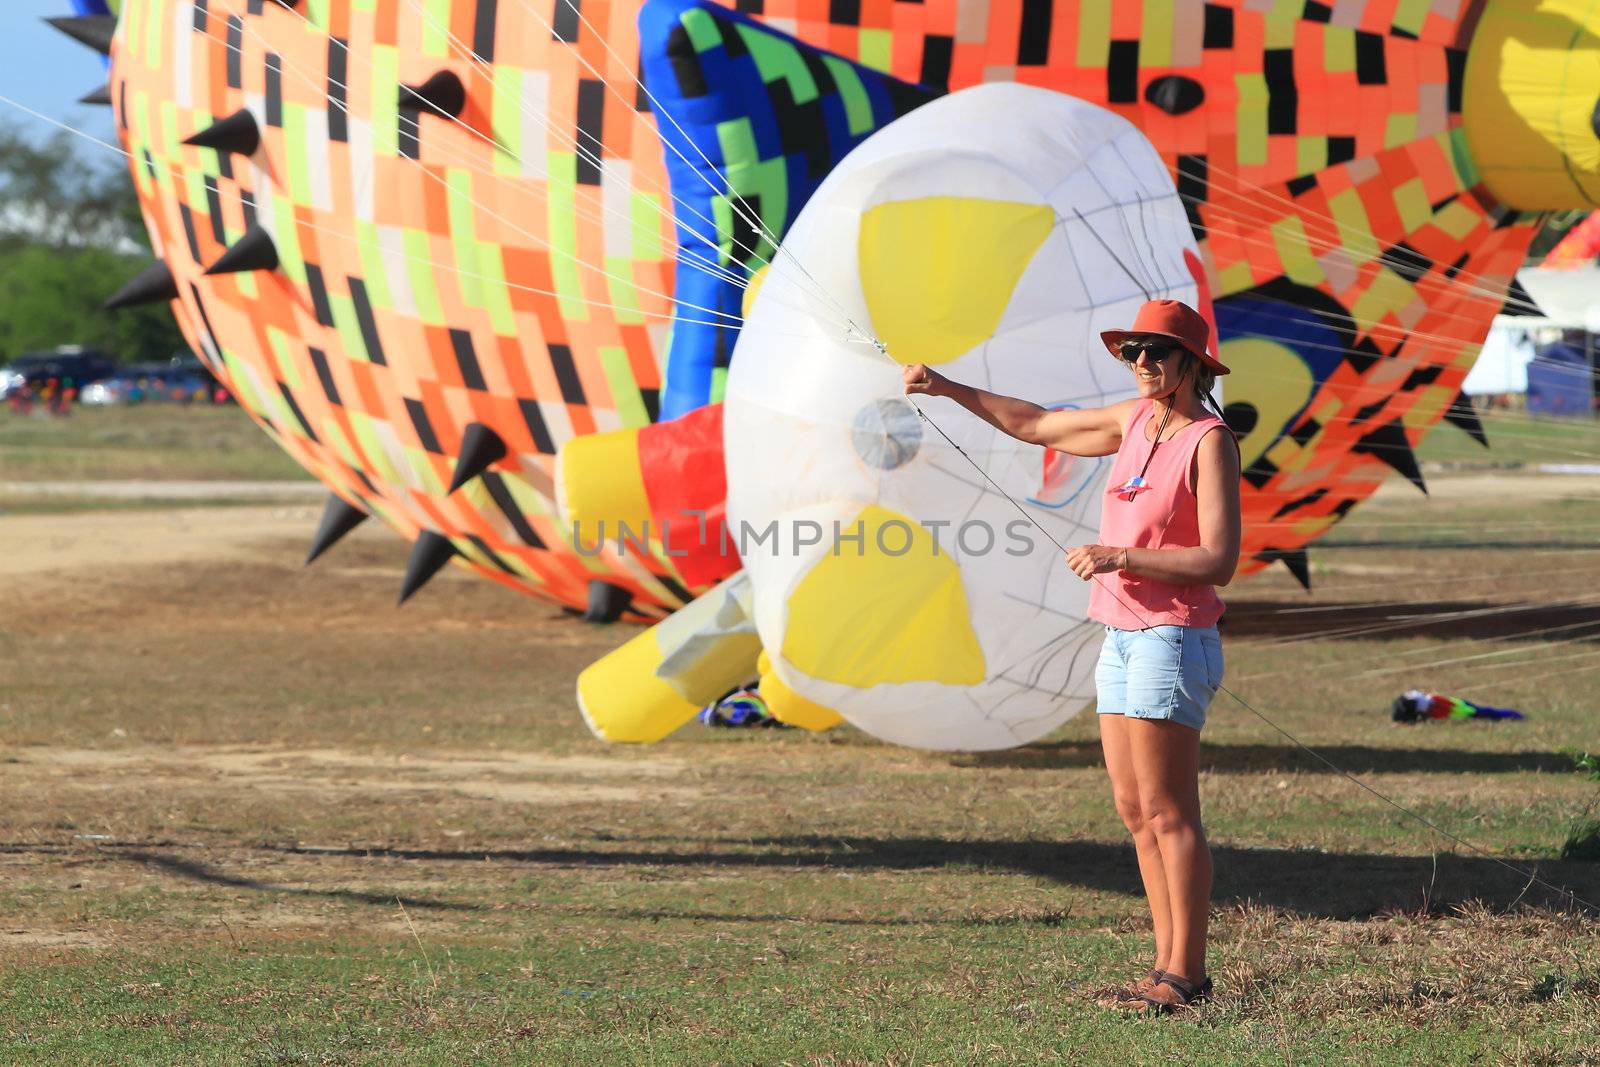 CHA-AM - MARCH 10: Colorful kites in the 12th Thailand Internati by rufous